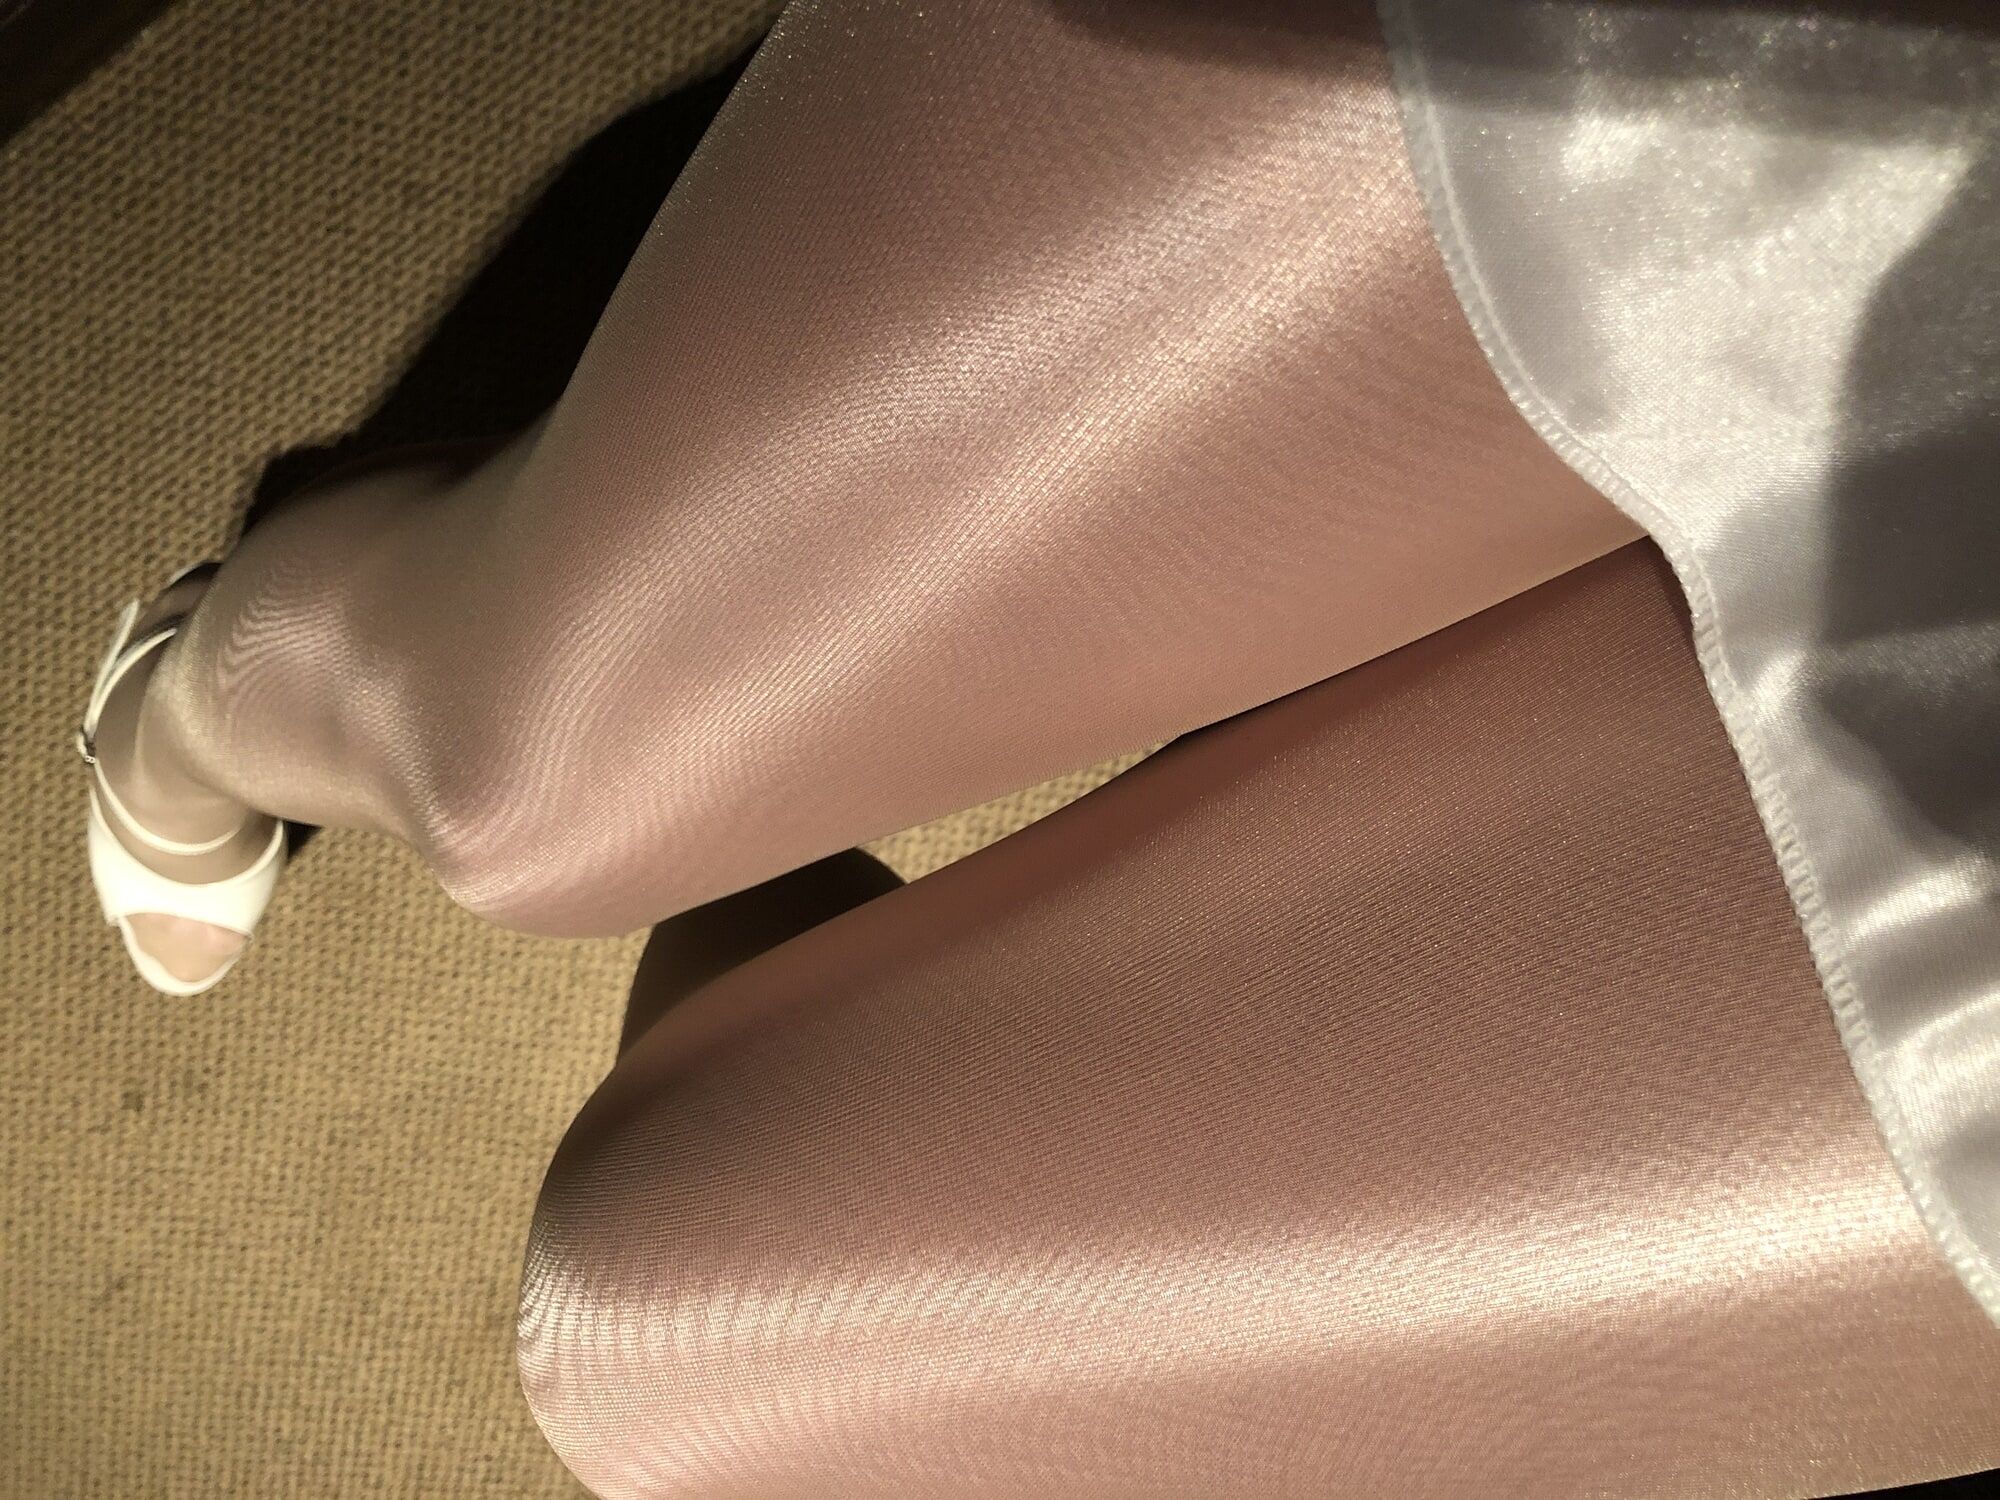 So much shiny, glossy and satin Pink and White combination. #12